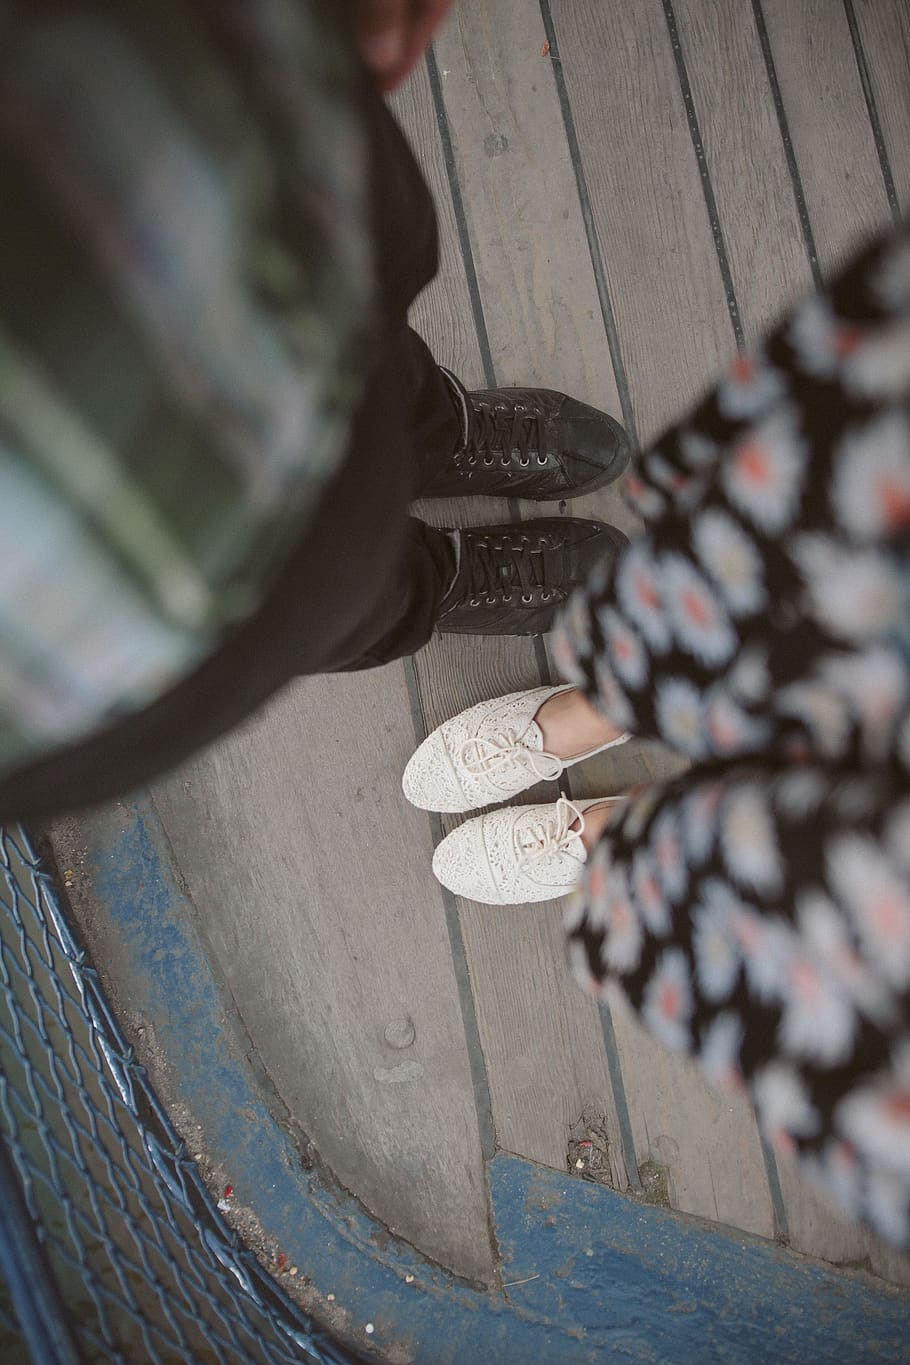 canada, toronto, him, outfit, wood, her, shoes, one person